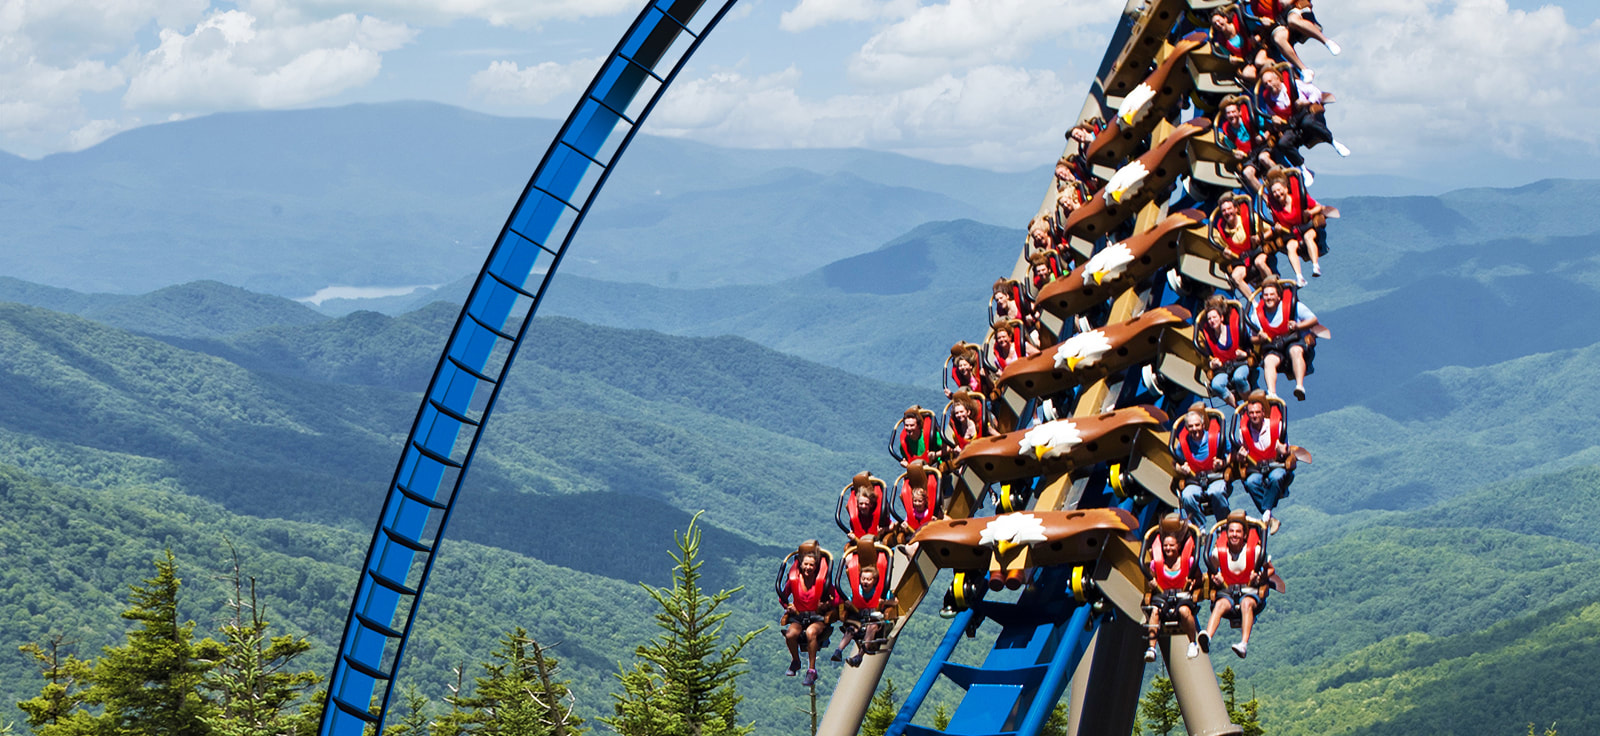 Dollywood Coaster close to Willow Brook Lodge in Pigeon TN